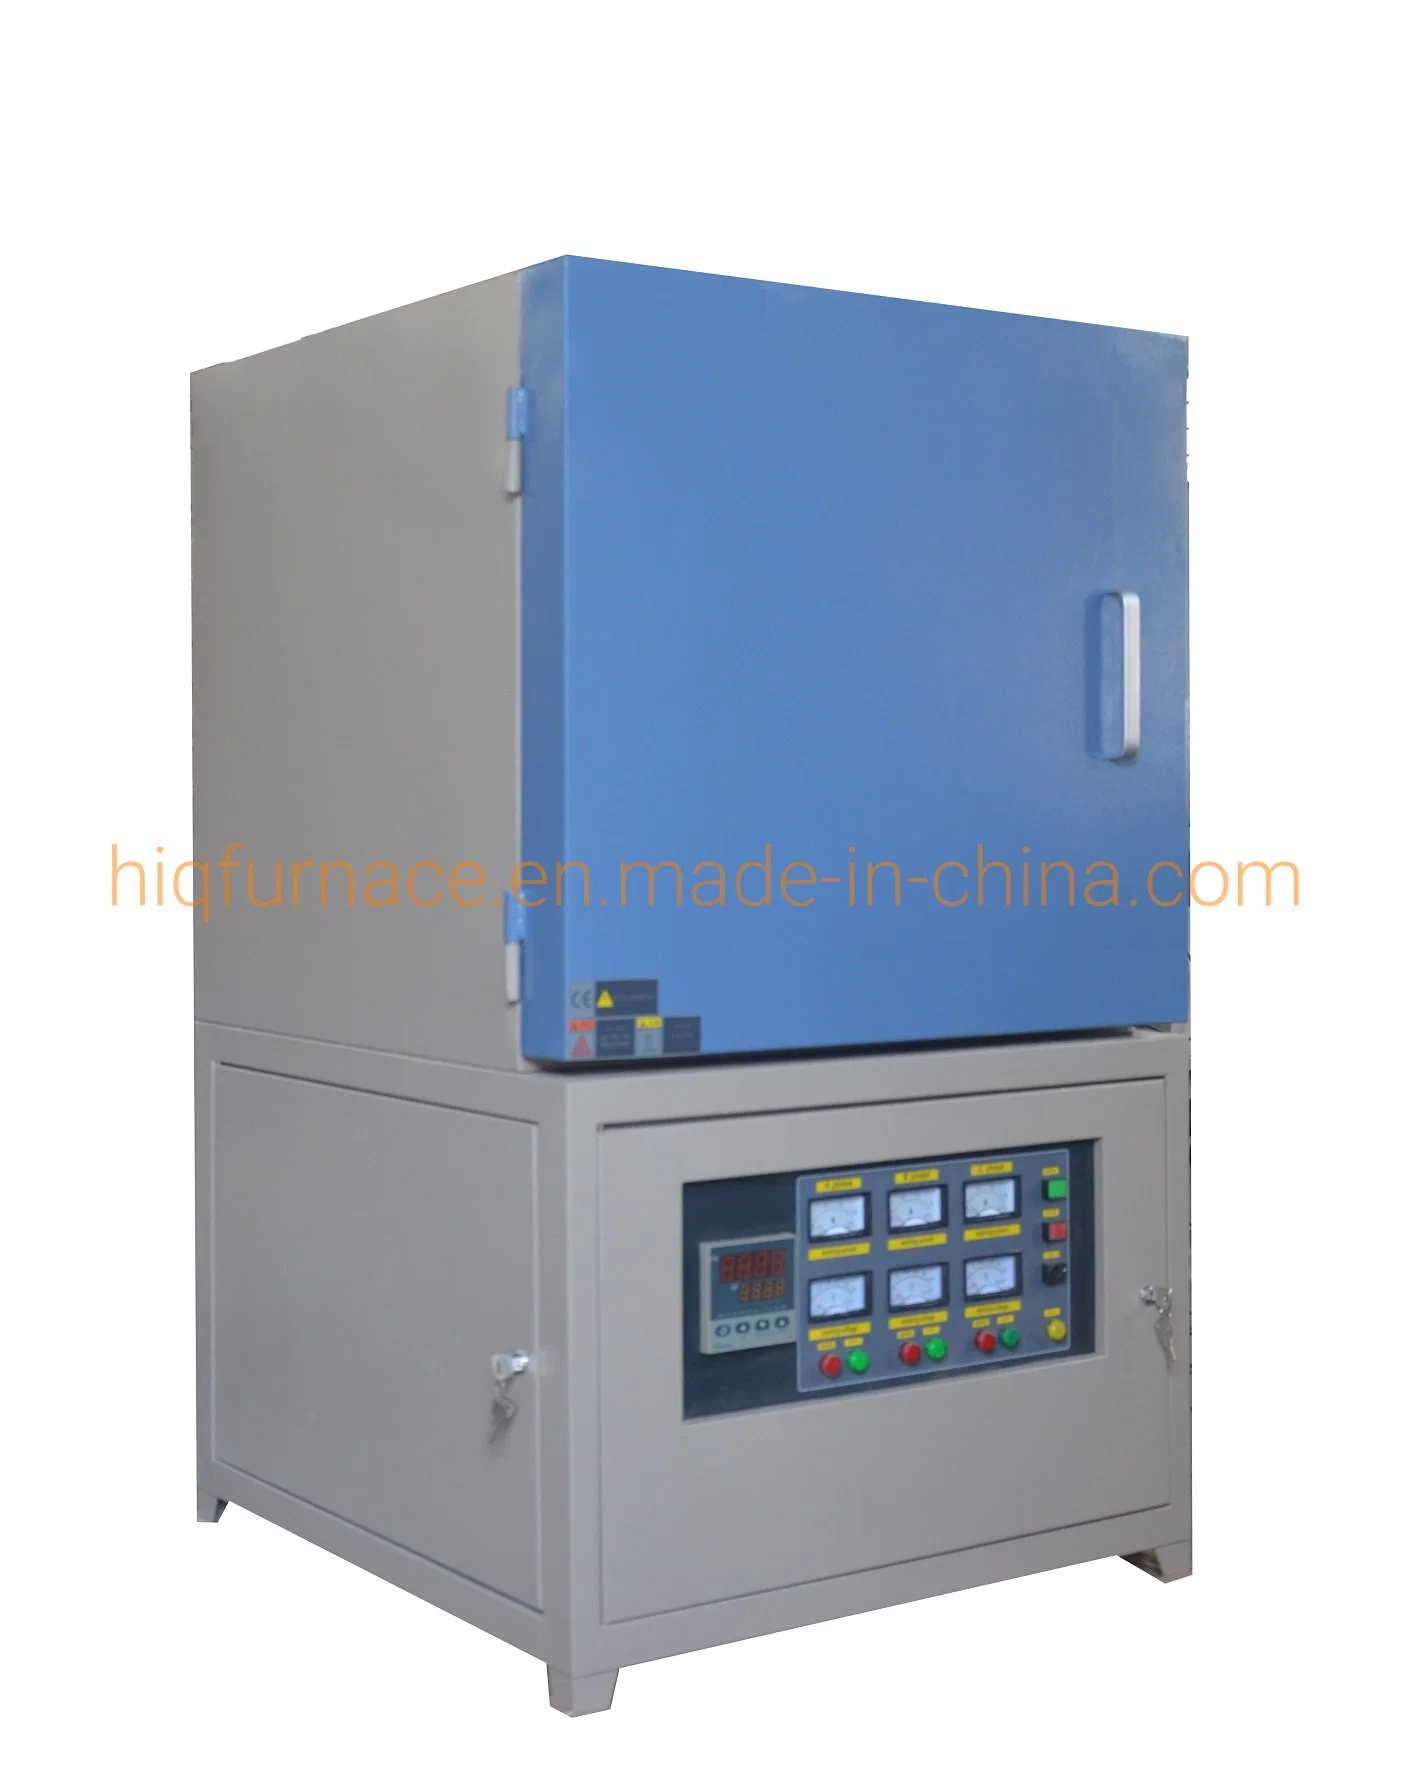 Heat Treatment Laboratory Melting Chamber Muffle Furnace for Lab Scientific Instrument, High Temperature Sintering Furnace, Muffle Furnace, Box Furnace